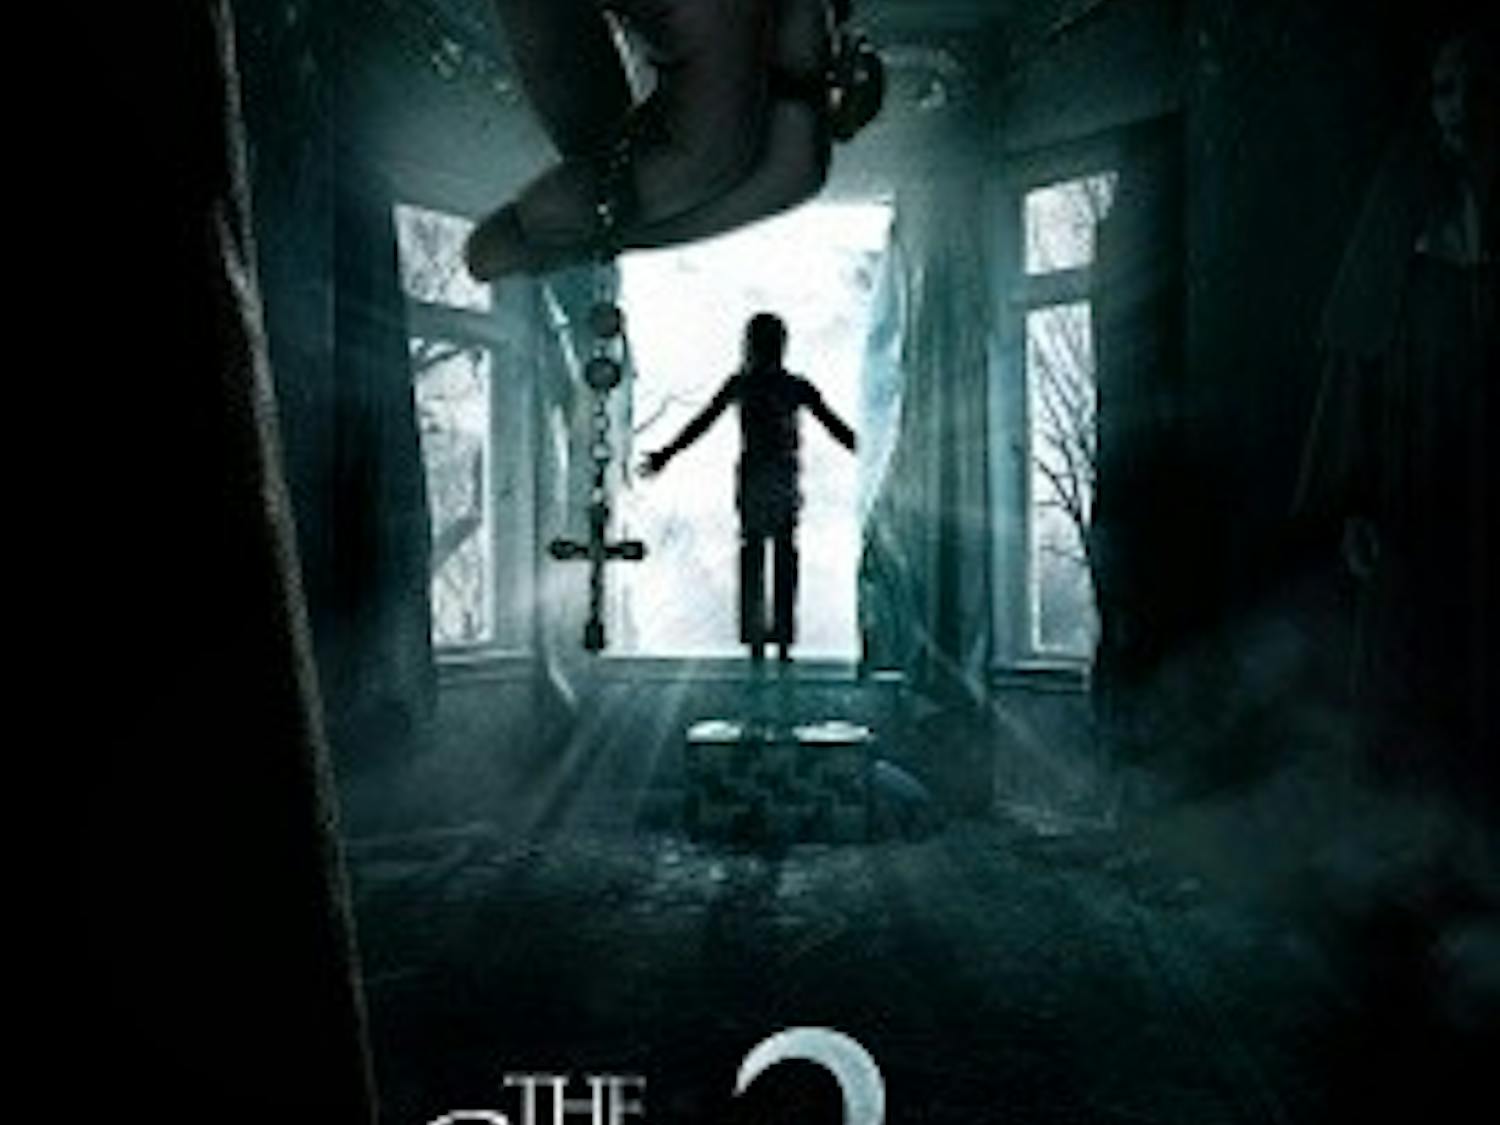 "The Conjuring 2" may not be the most original of horror films, but it does provide a satisfying sequel to the original "The Conjuring" film.